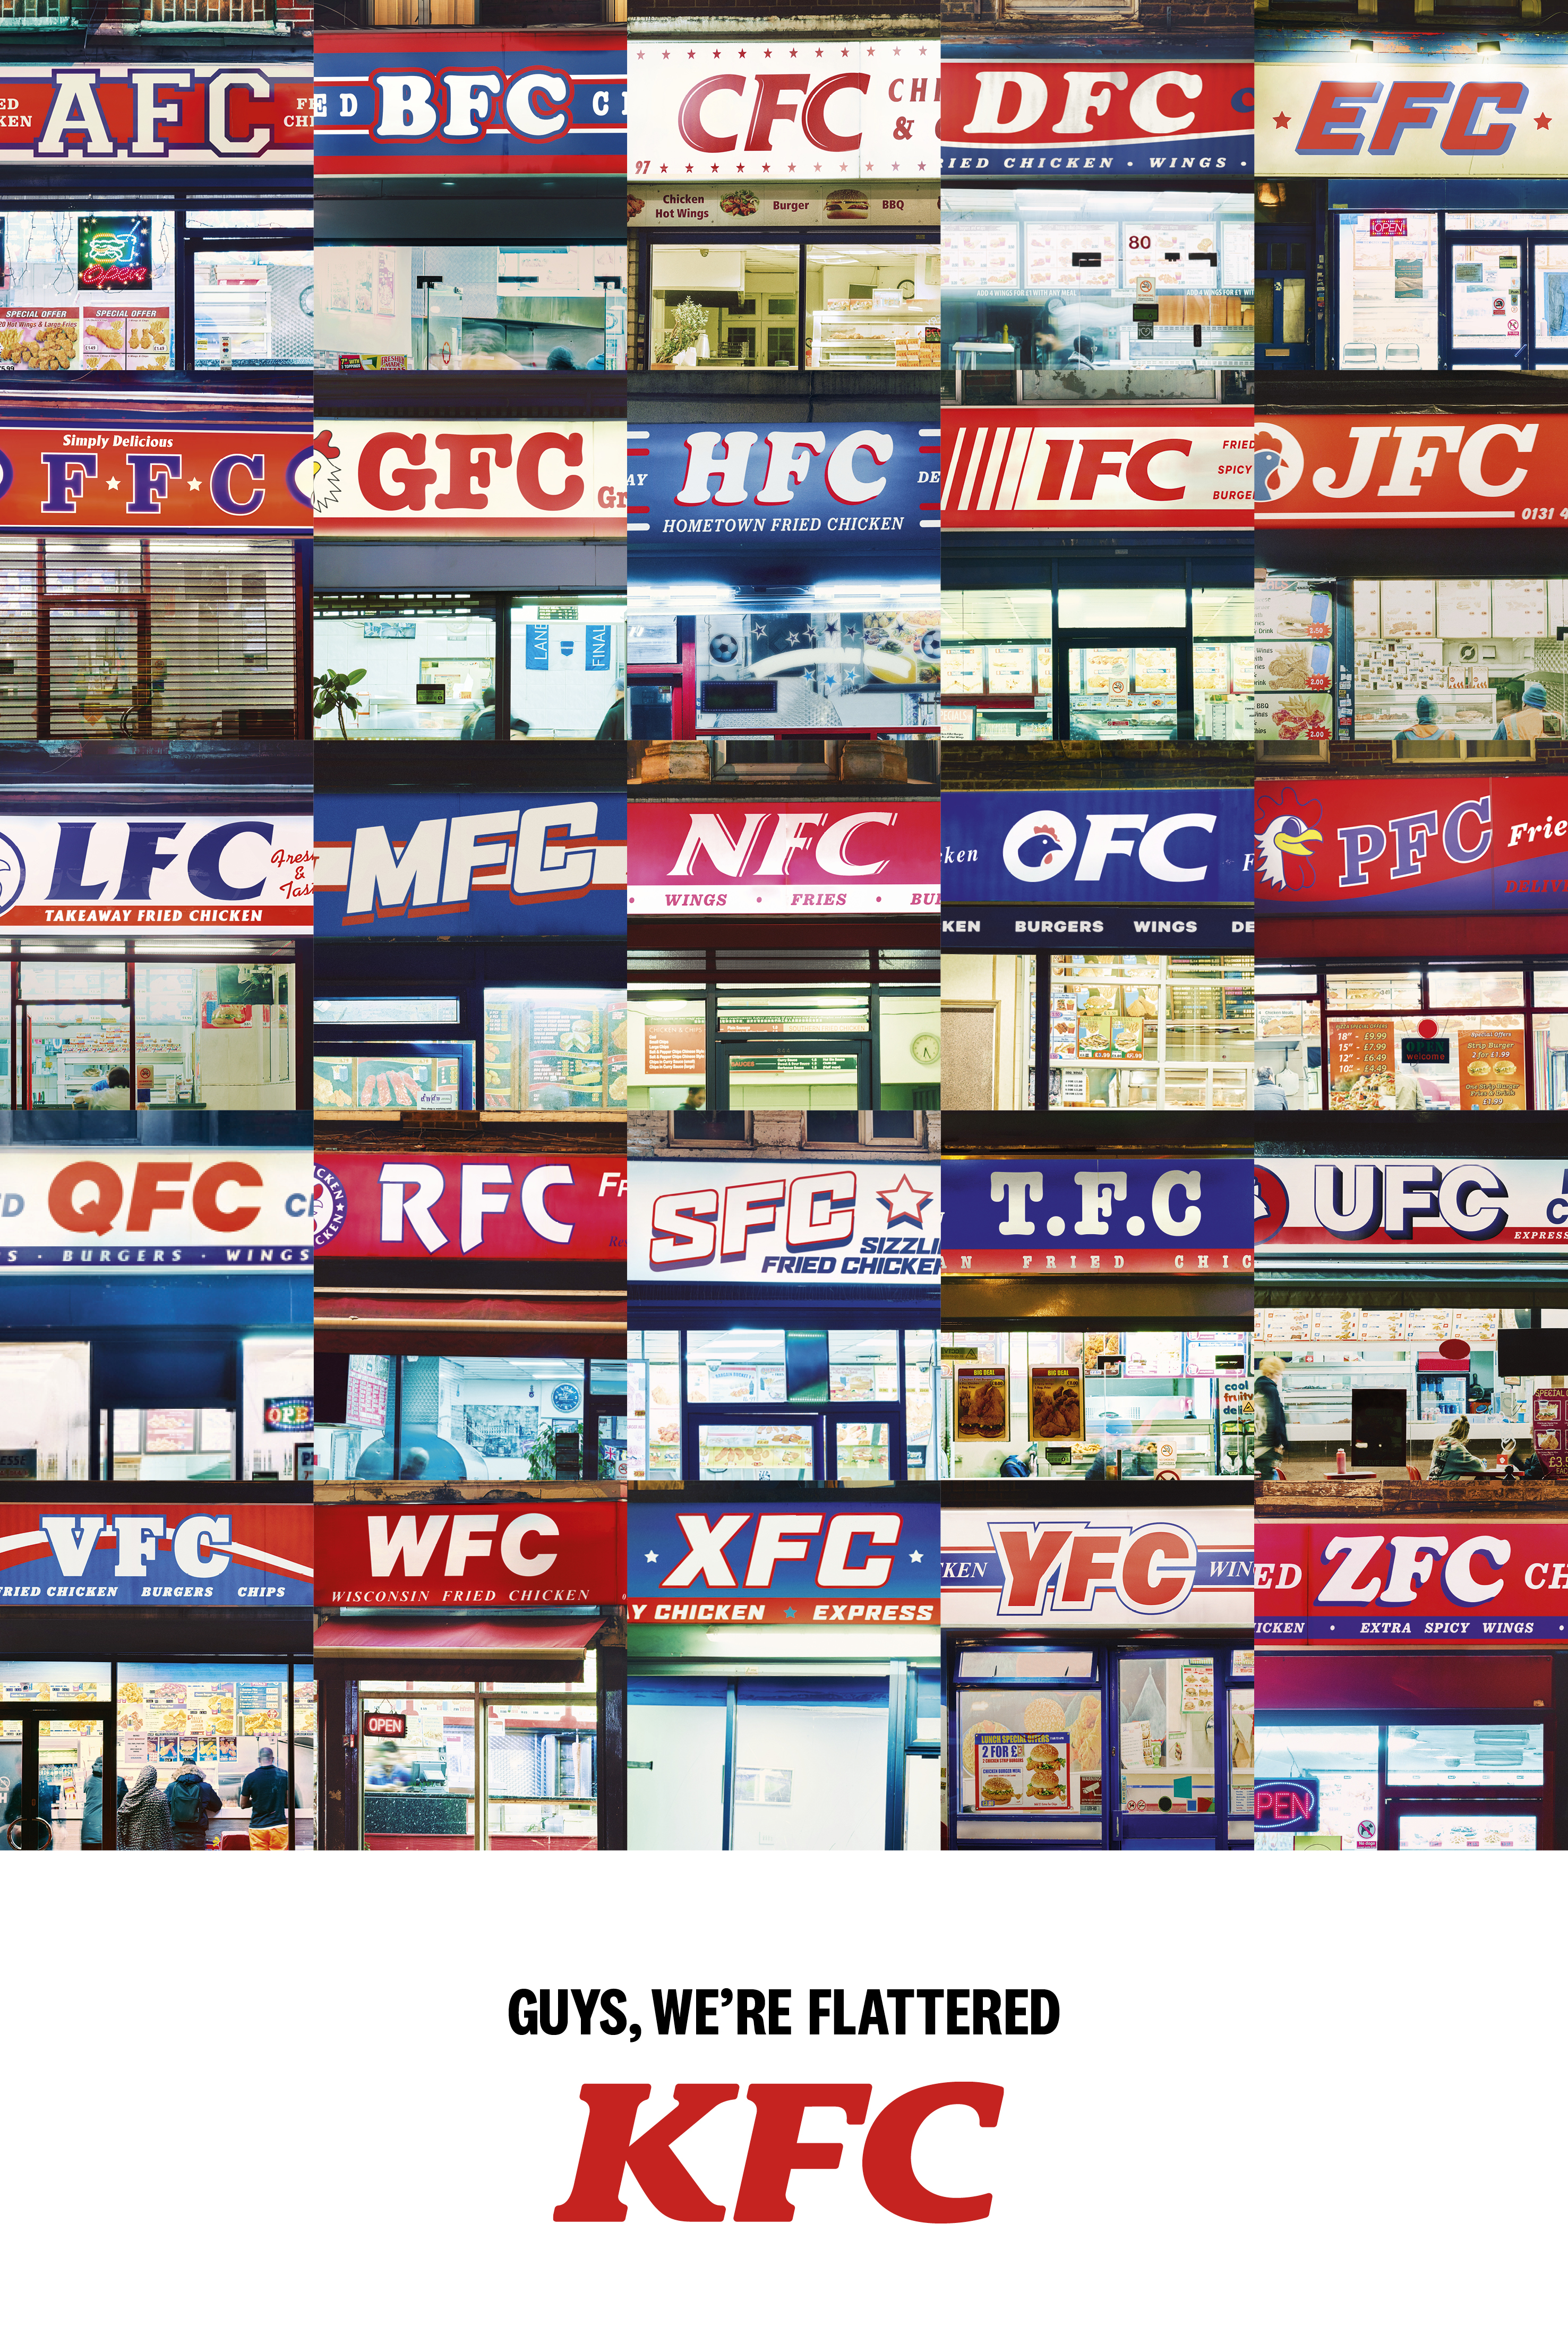 Kfc Afc Zfc Outdoor Ad Campaign Fonts In Use